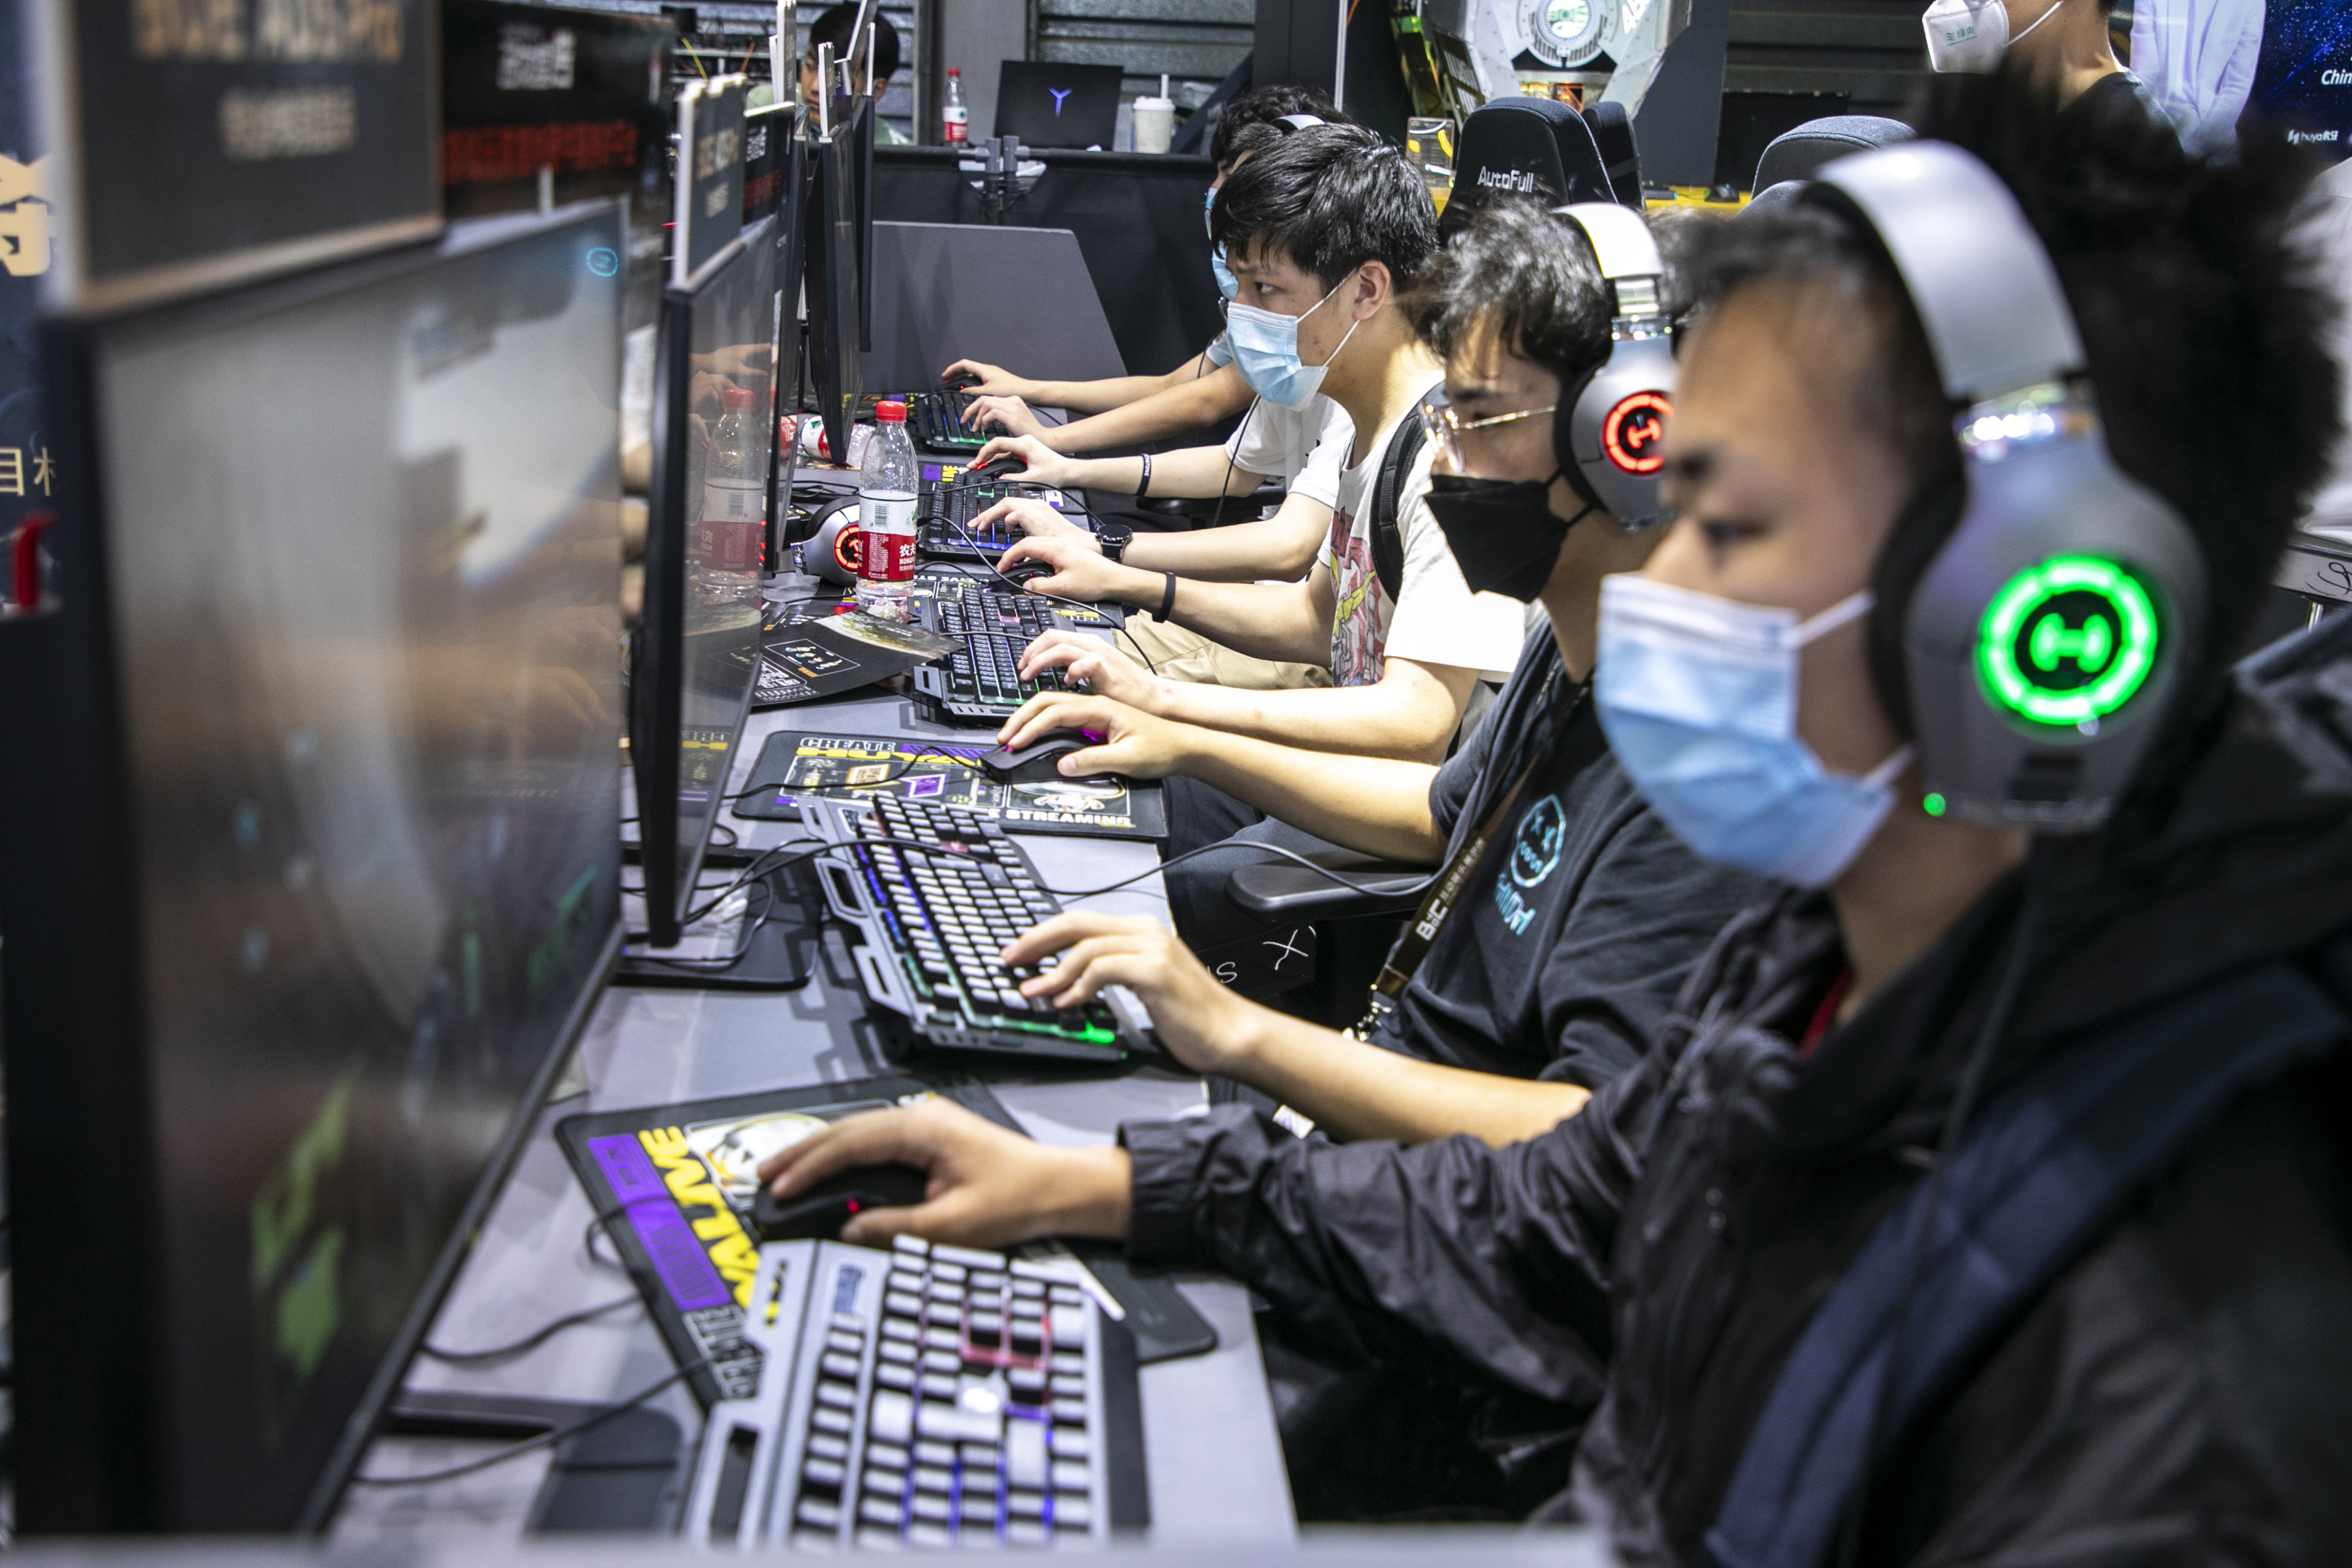 No evidence that Chinese playtime mandates reduced heavy gaming in